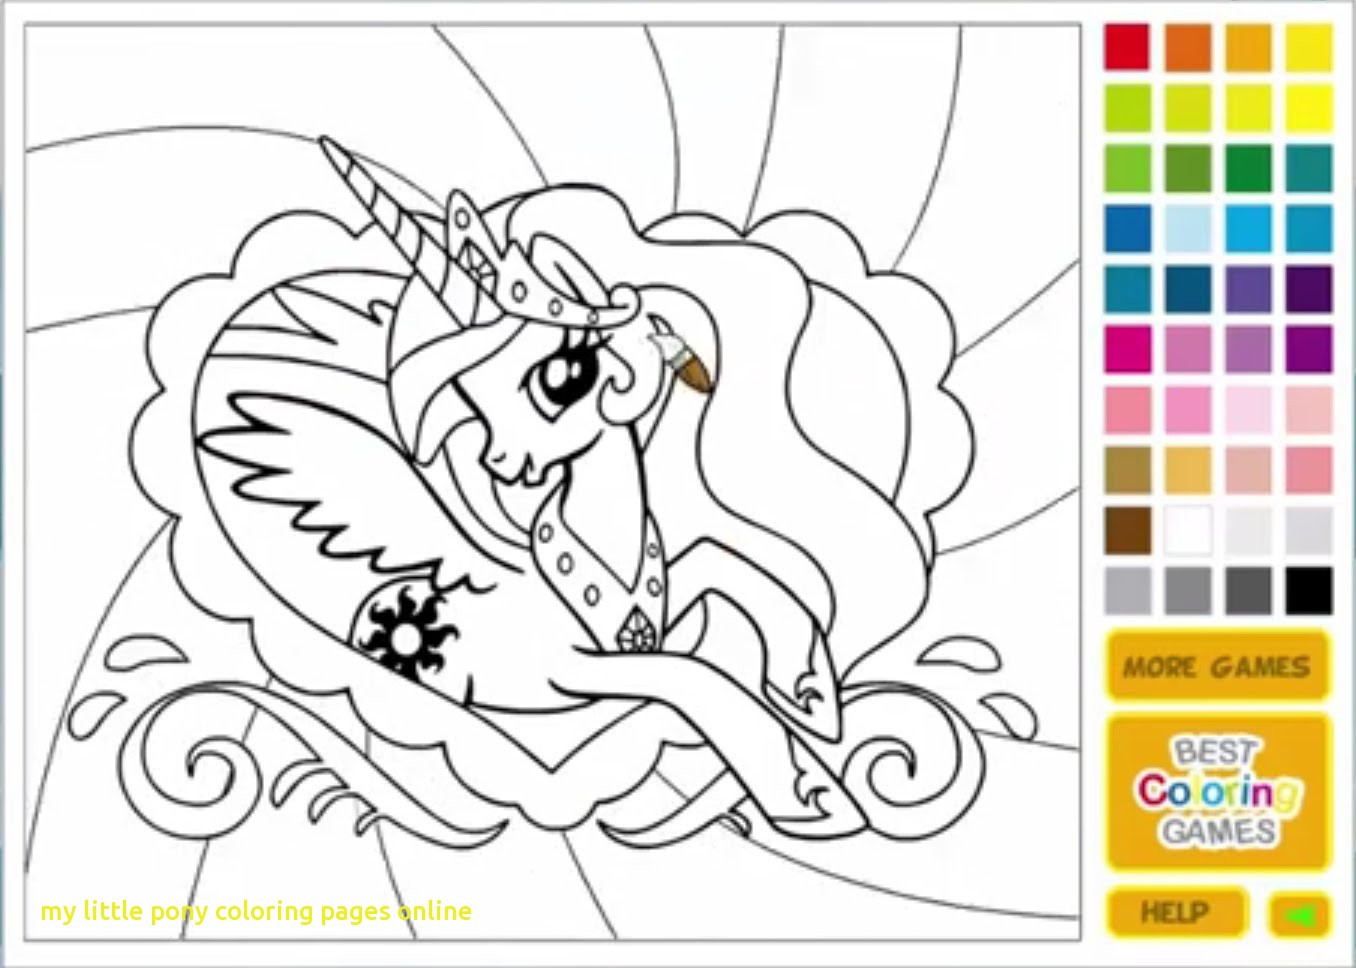 You Jtube Free Coloring Books For Toddlers
 My Little Pony Coloring Pages line